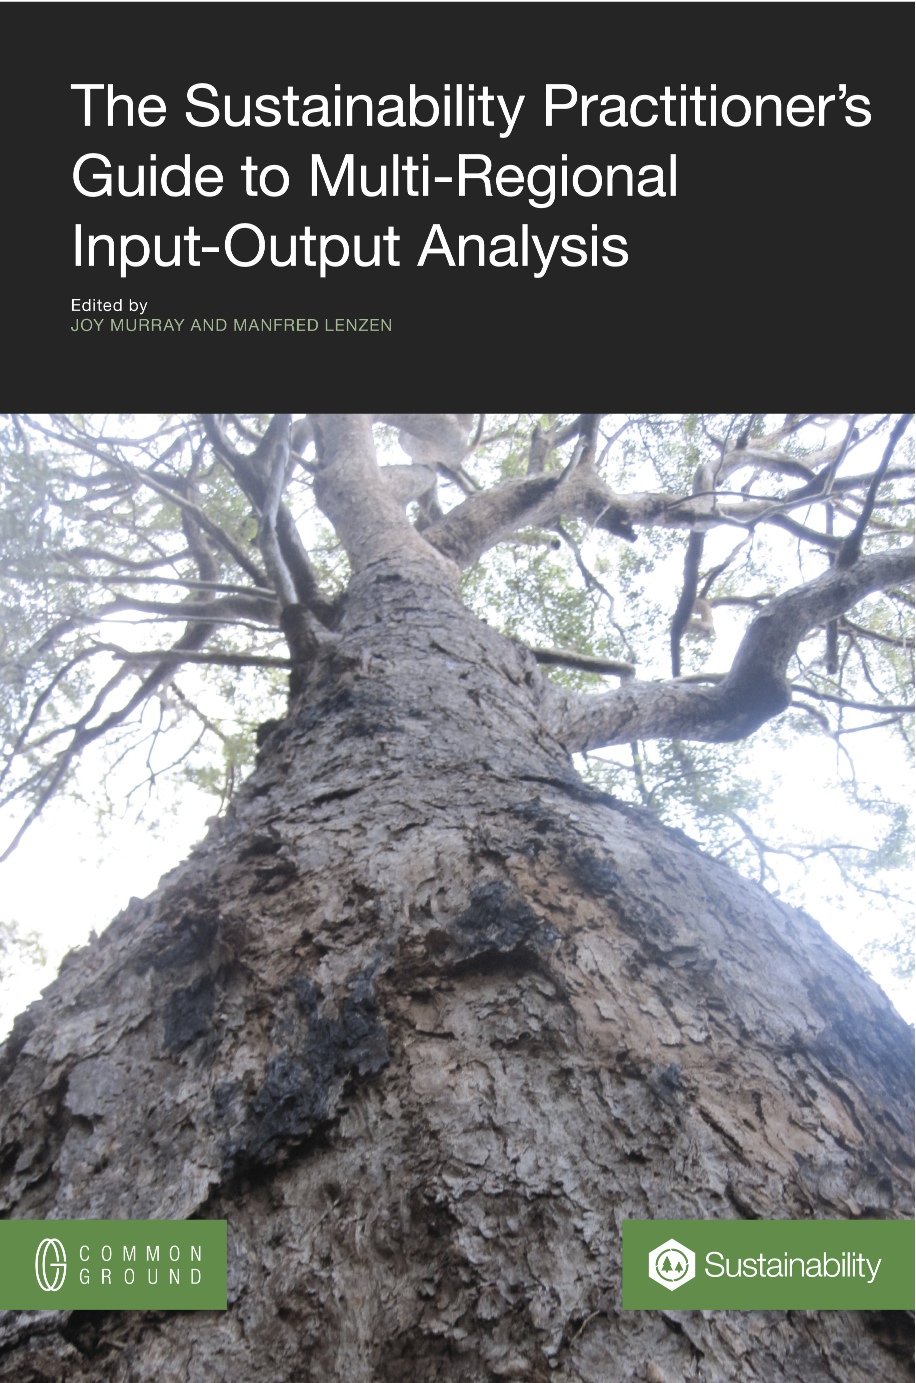 The Sustainability Practitioner’s Guide To Multi-Regional Input-Output Analysis